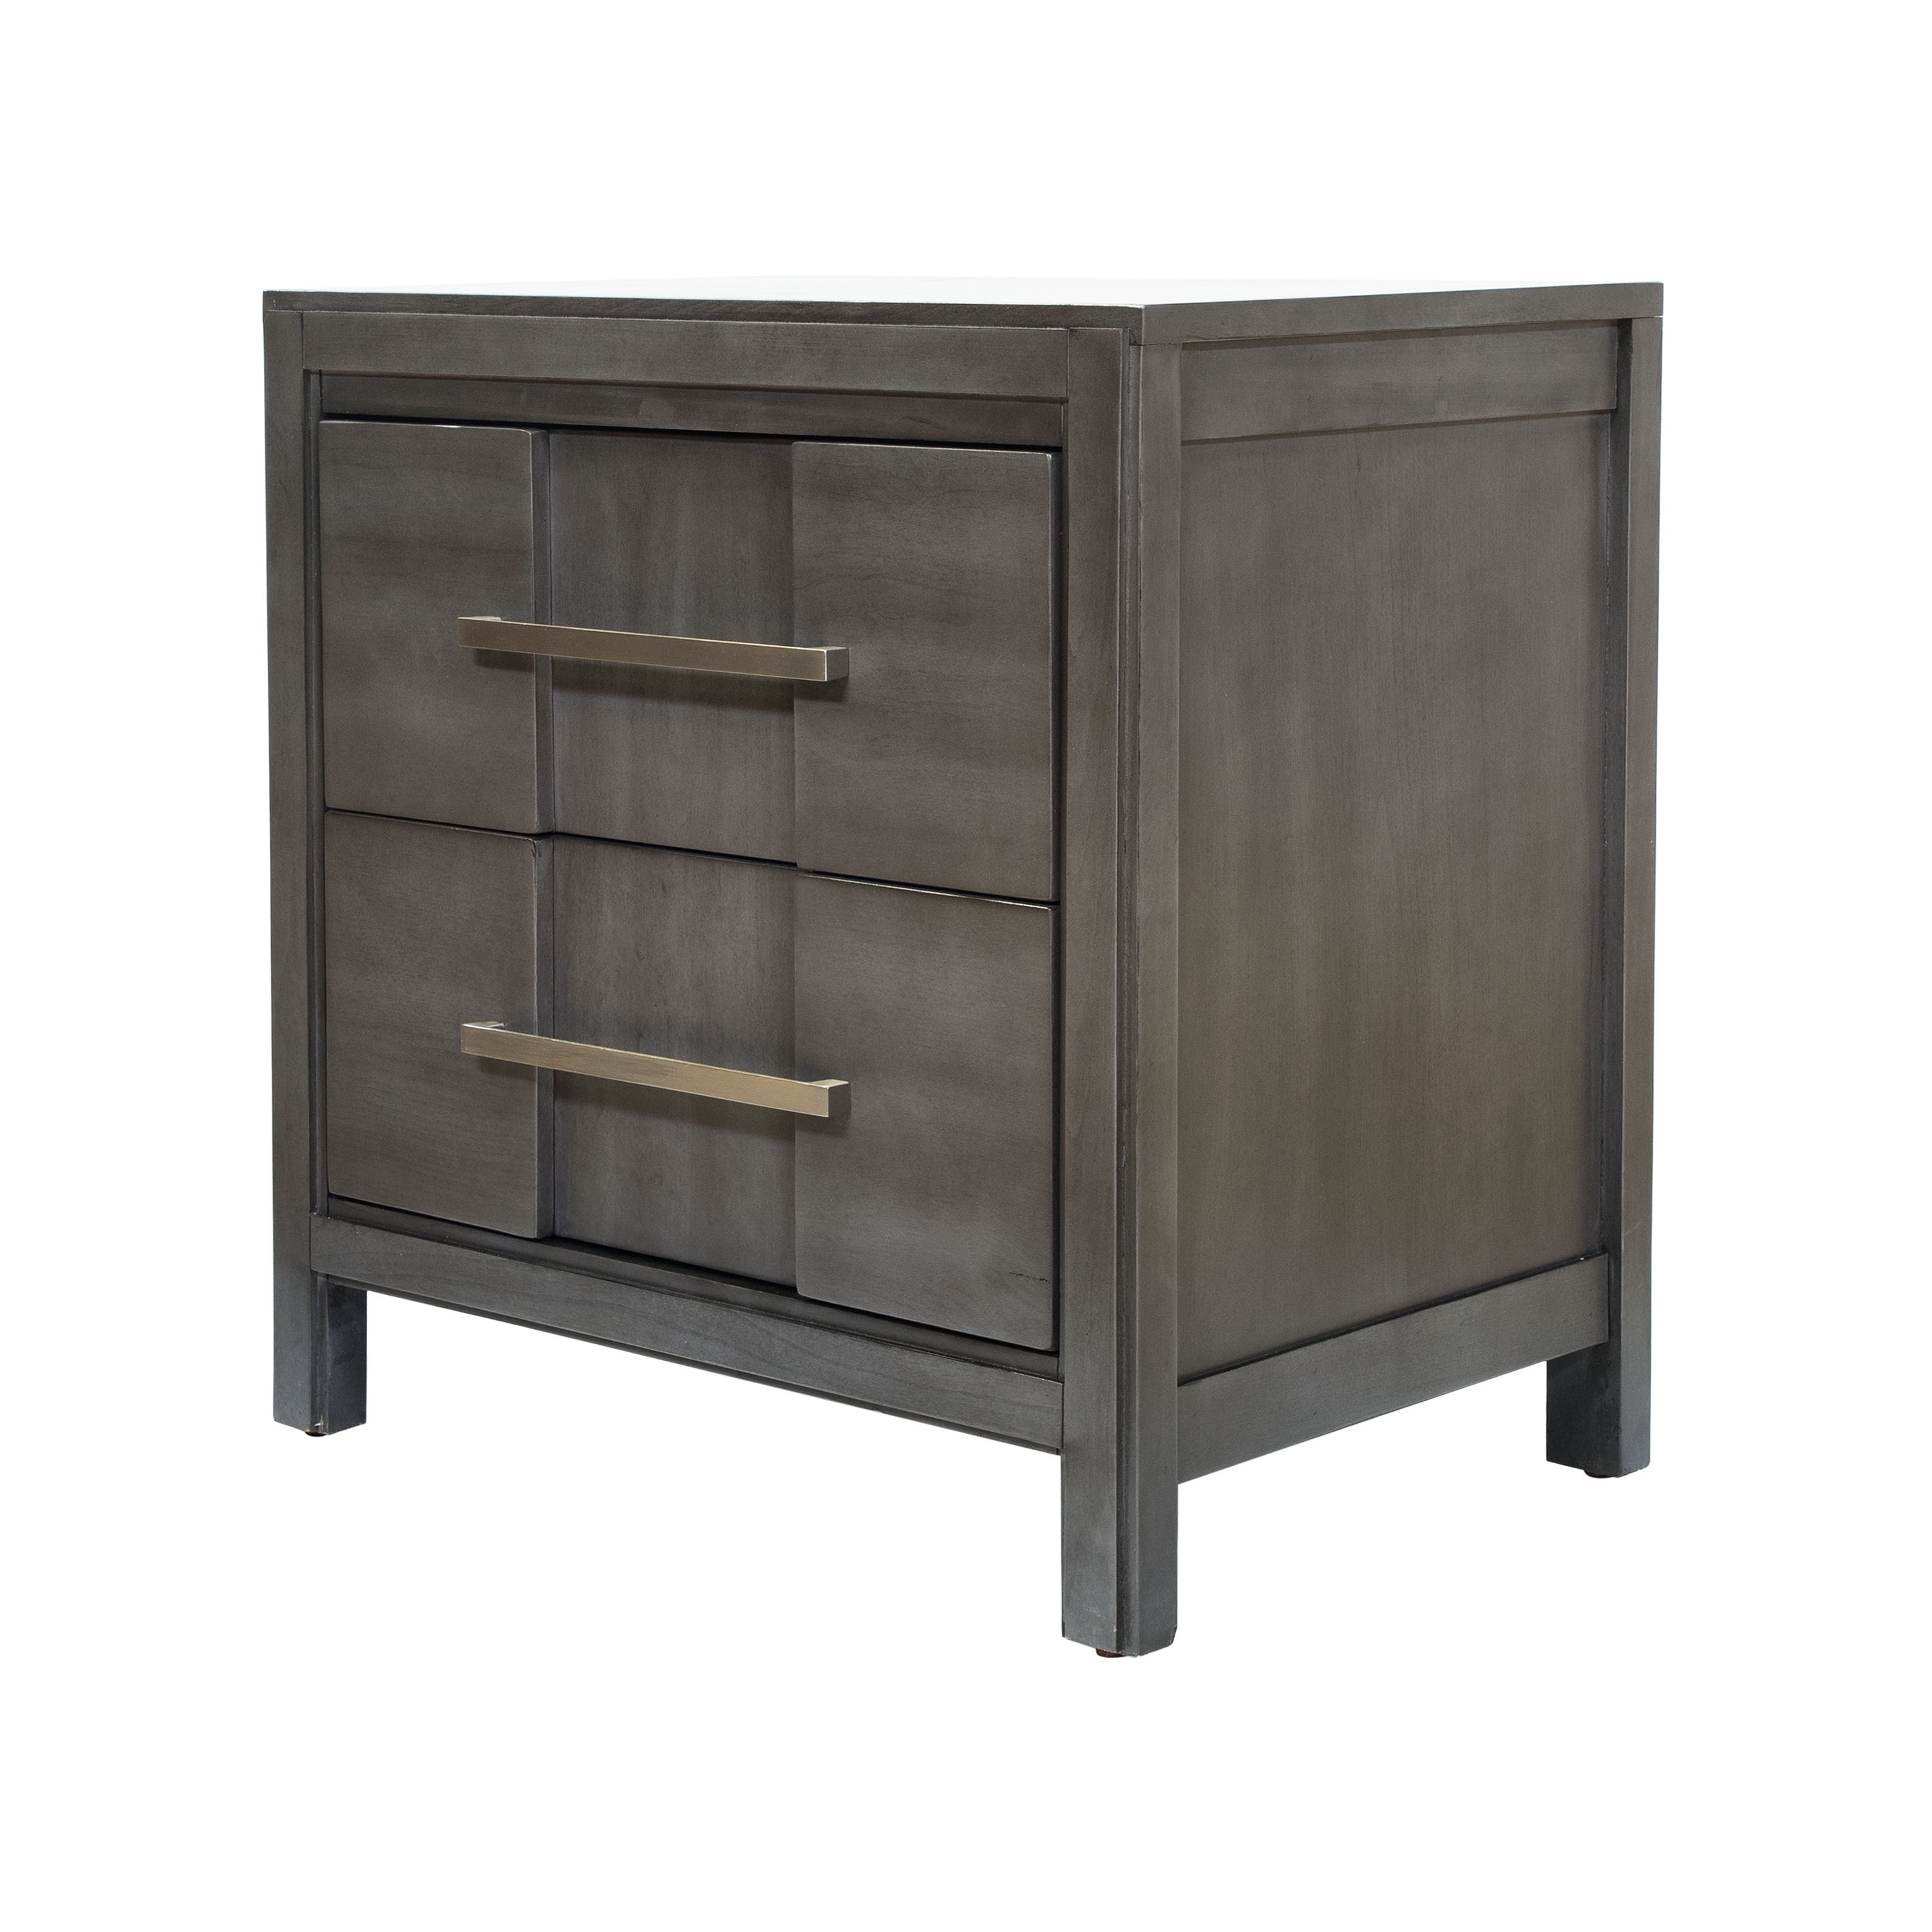 Furniture Of America Tass Transitional Solid Wood 2 Drawer Nightstand On Sale Overstock 18016965 Grey